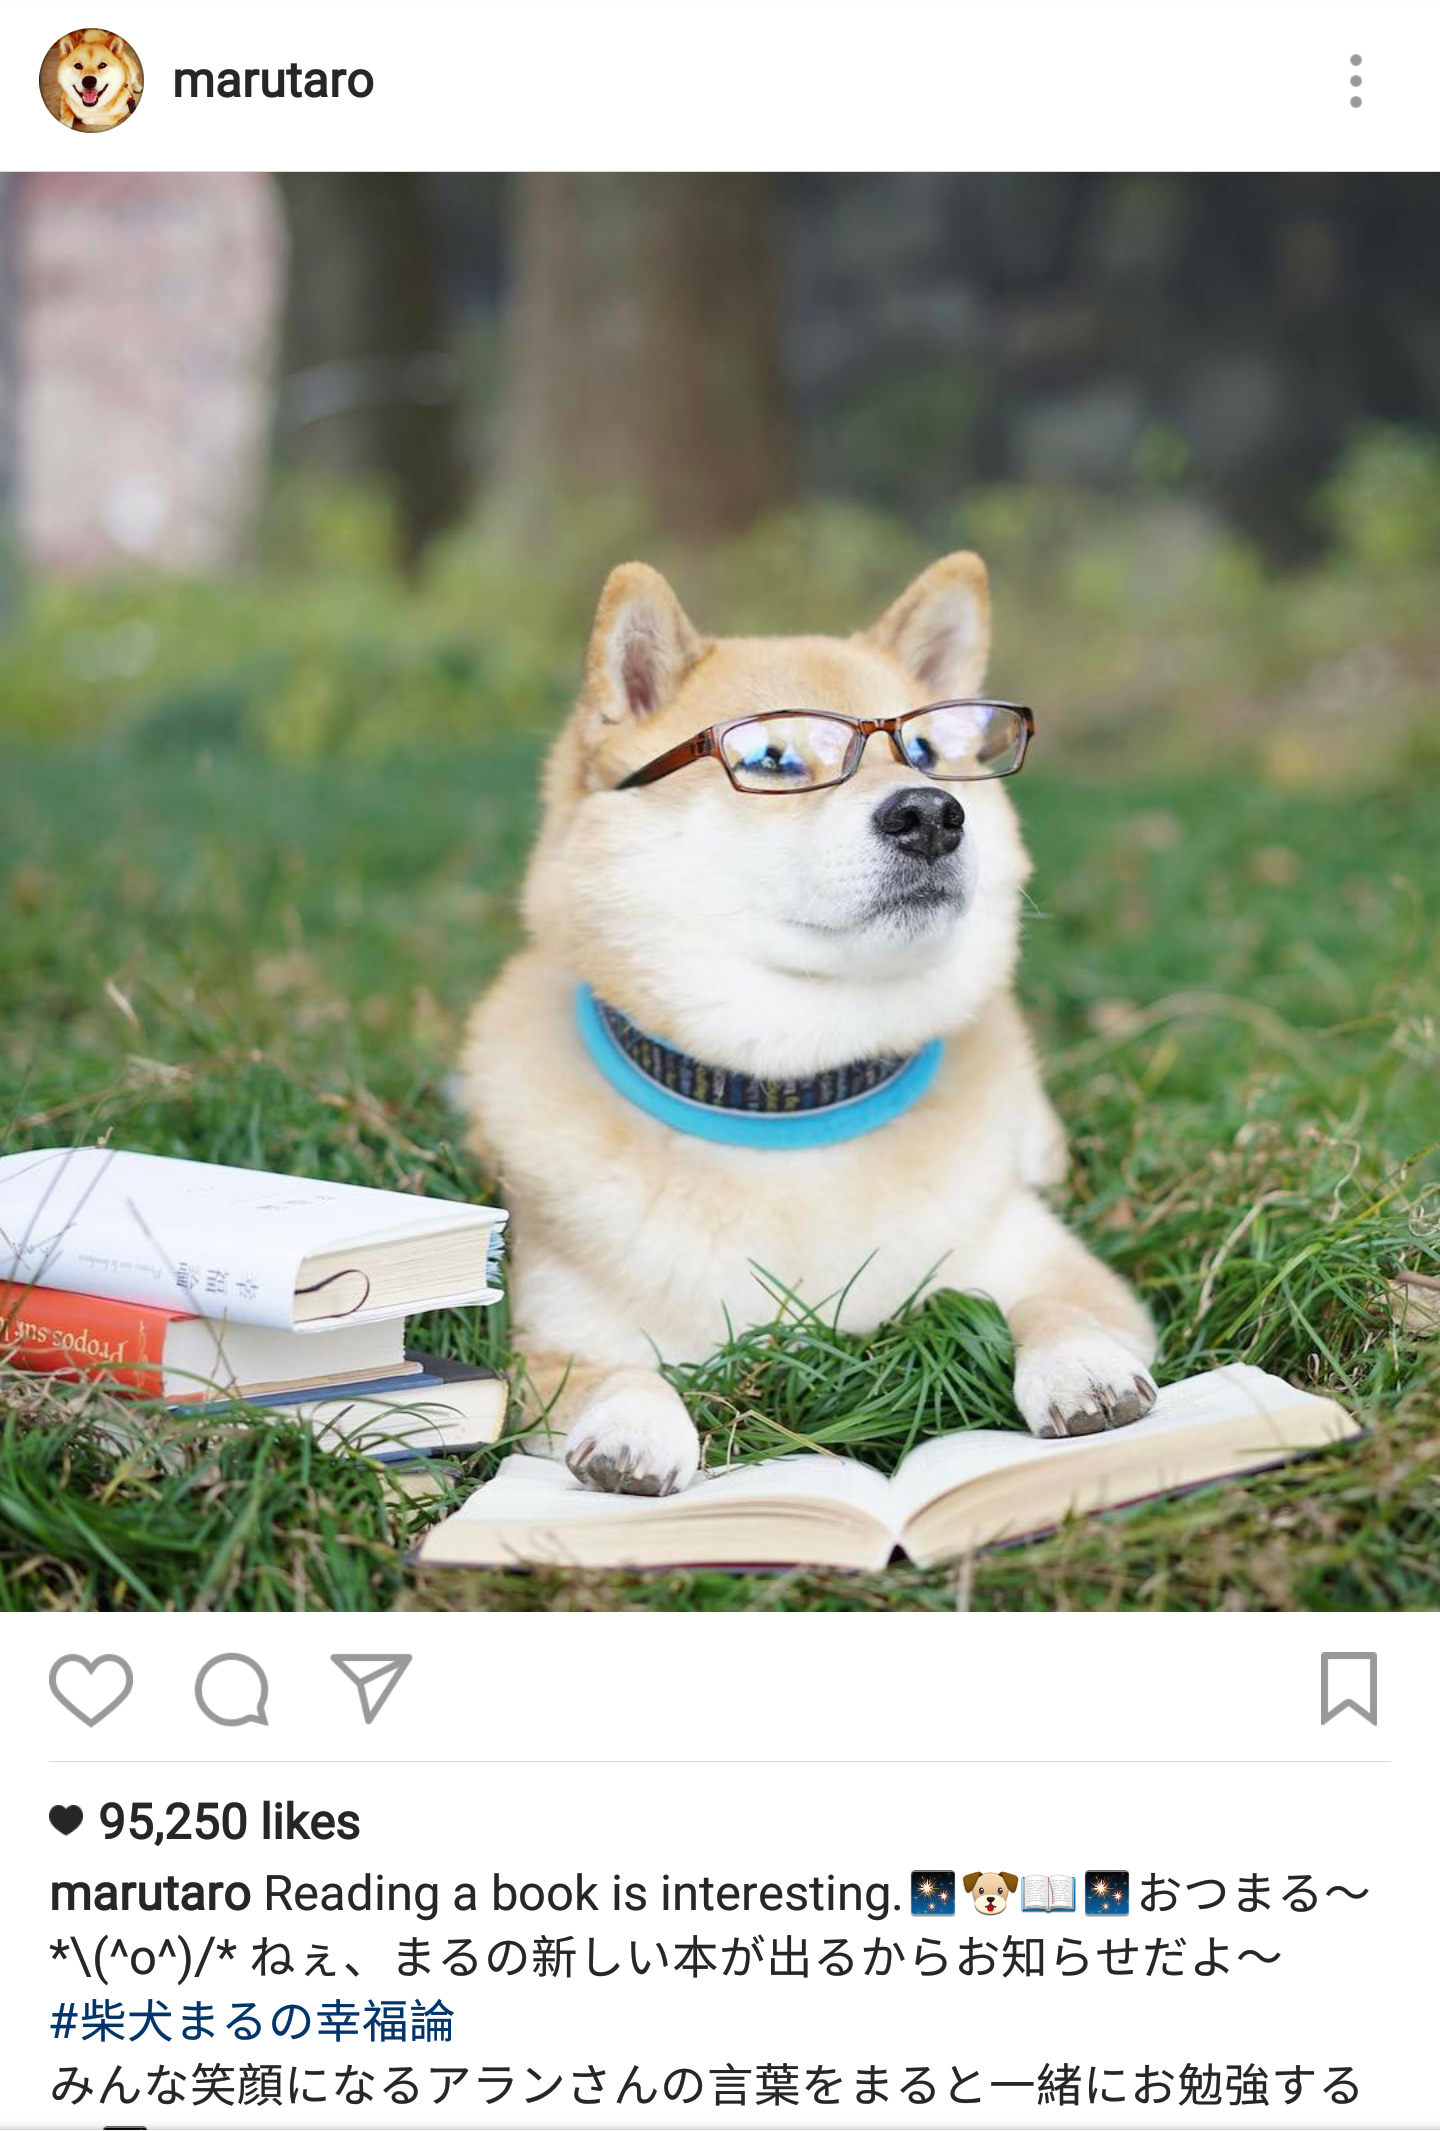 @marutaro is a Shiba Inu with over 2.5 million followers on Instagram! Posed photos, hilarious doggy expressions and quite comical & creative parents.  